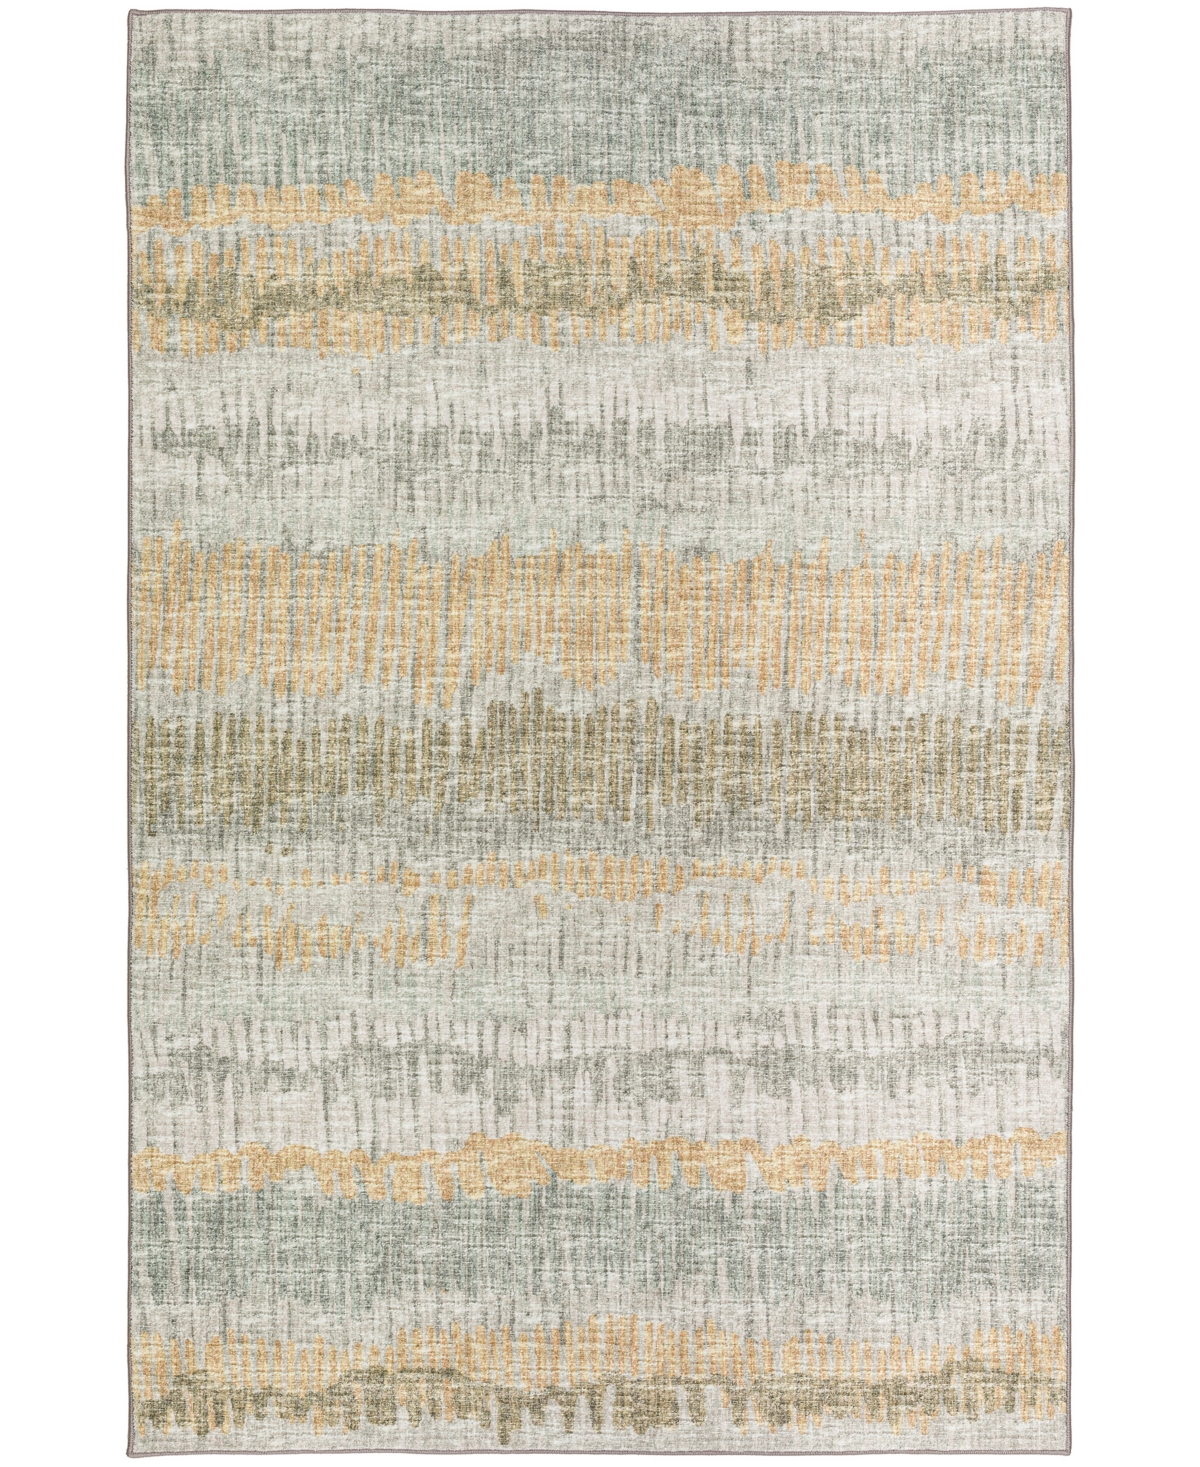 D Style Briggs Brg-4 5' x 7'6in Area Rug - Khaki